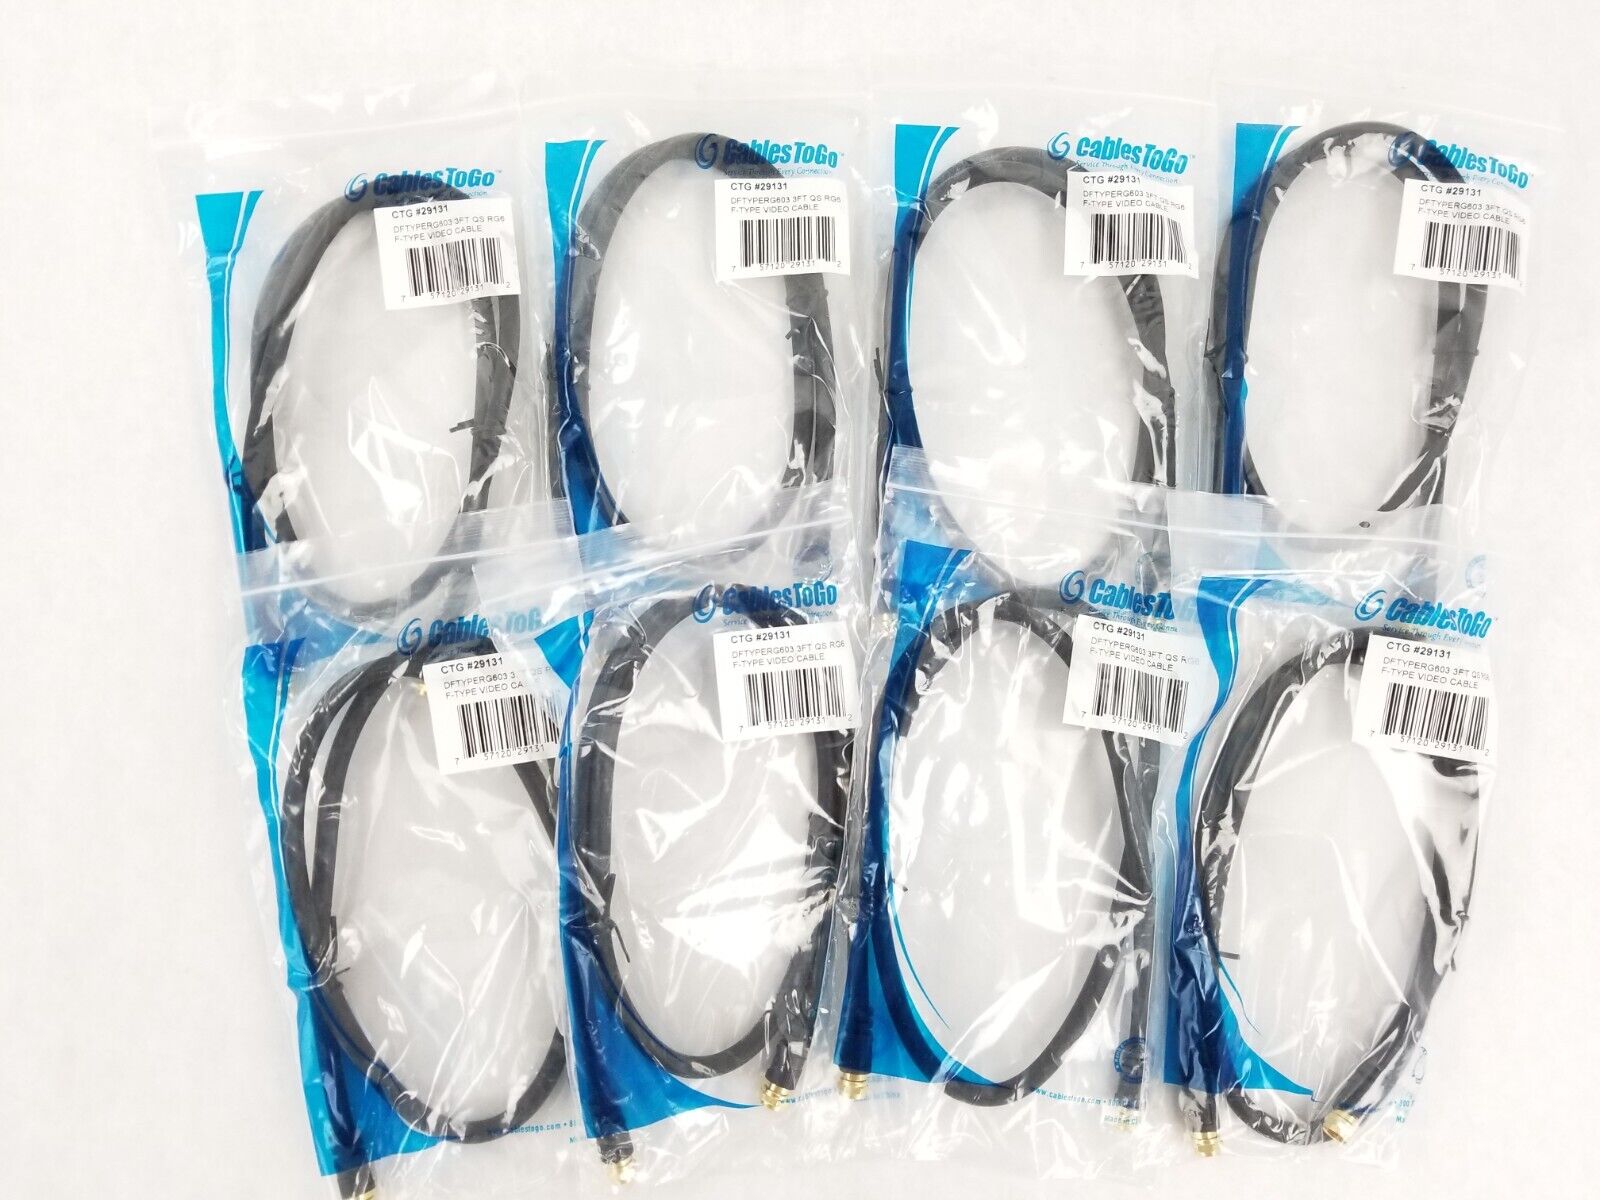 Lot of (8) CABLES TO GO 29131 3FT QS RG6 F-Type Video Cable NEW